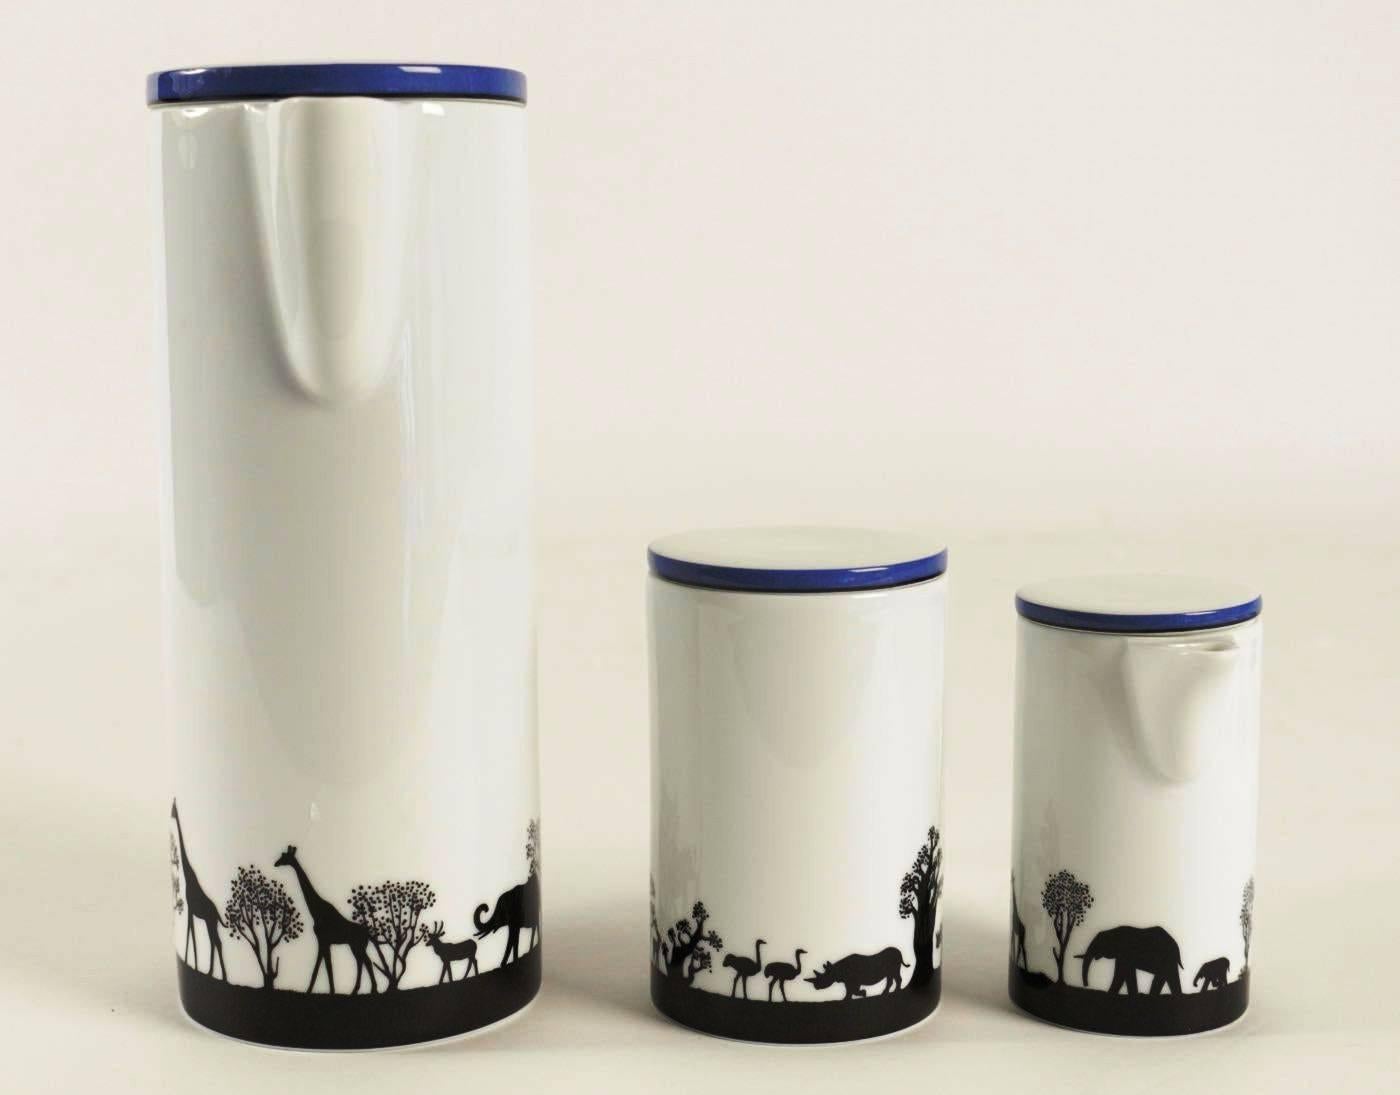 Rare coffee set designed by François-Xavier Lalanne for Artcurial, France, 1991
Porcelain, white lack and blue,
representing animals from the Jungle (Girafes, elephants, hippopotamus).
The set is called 